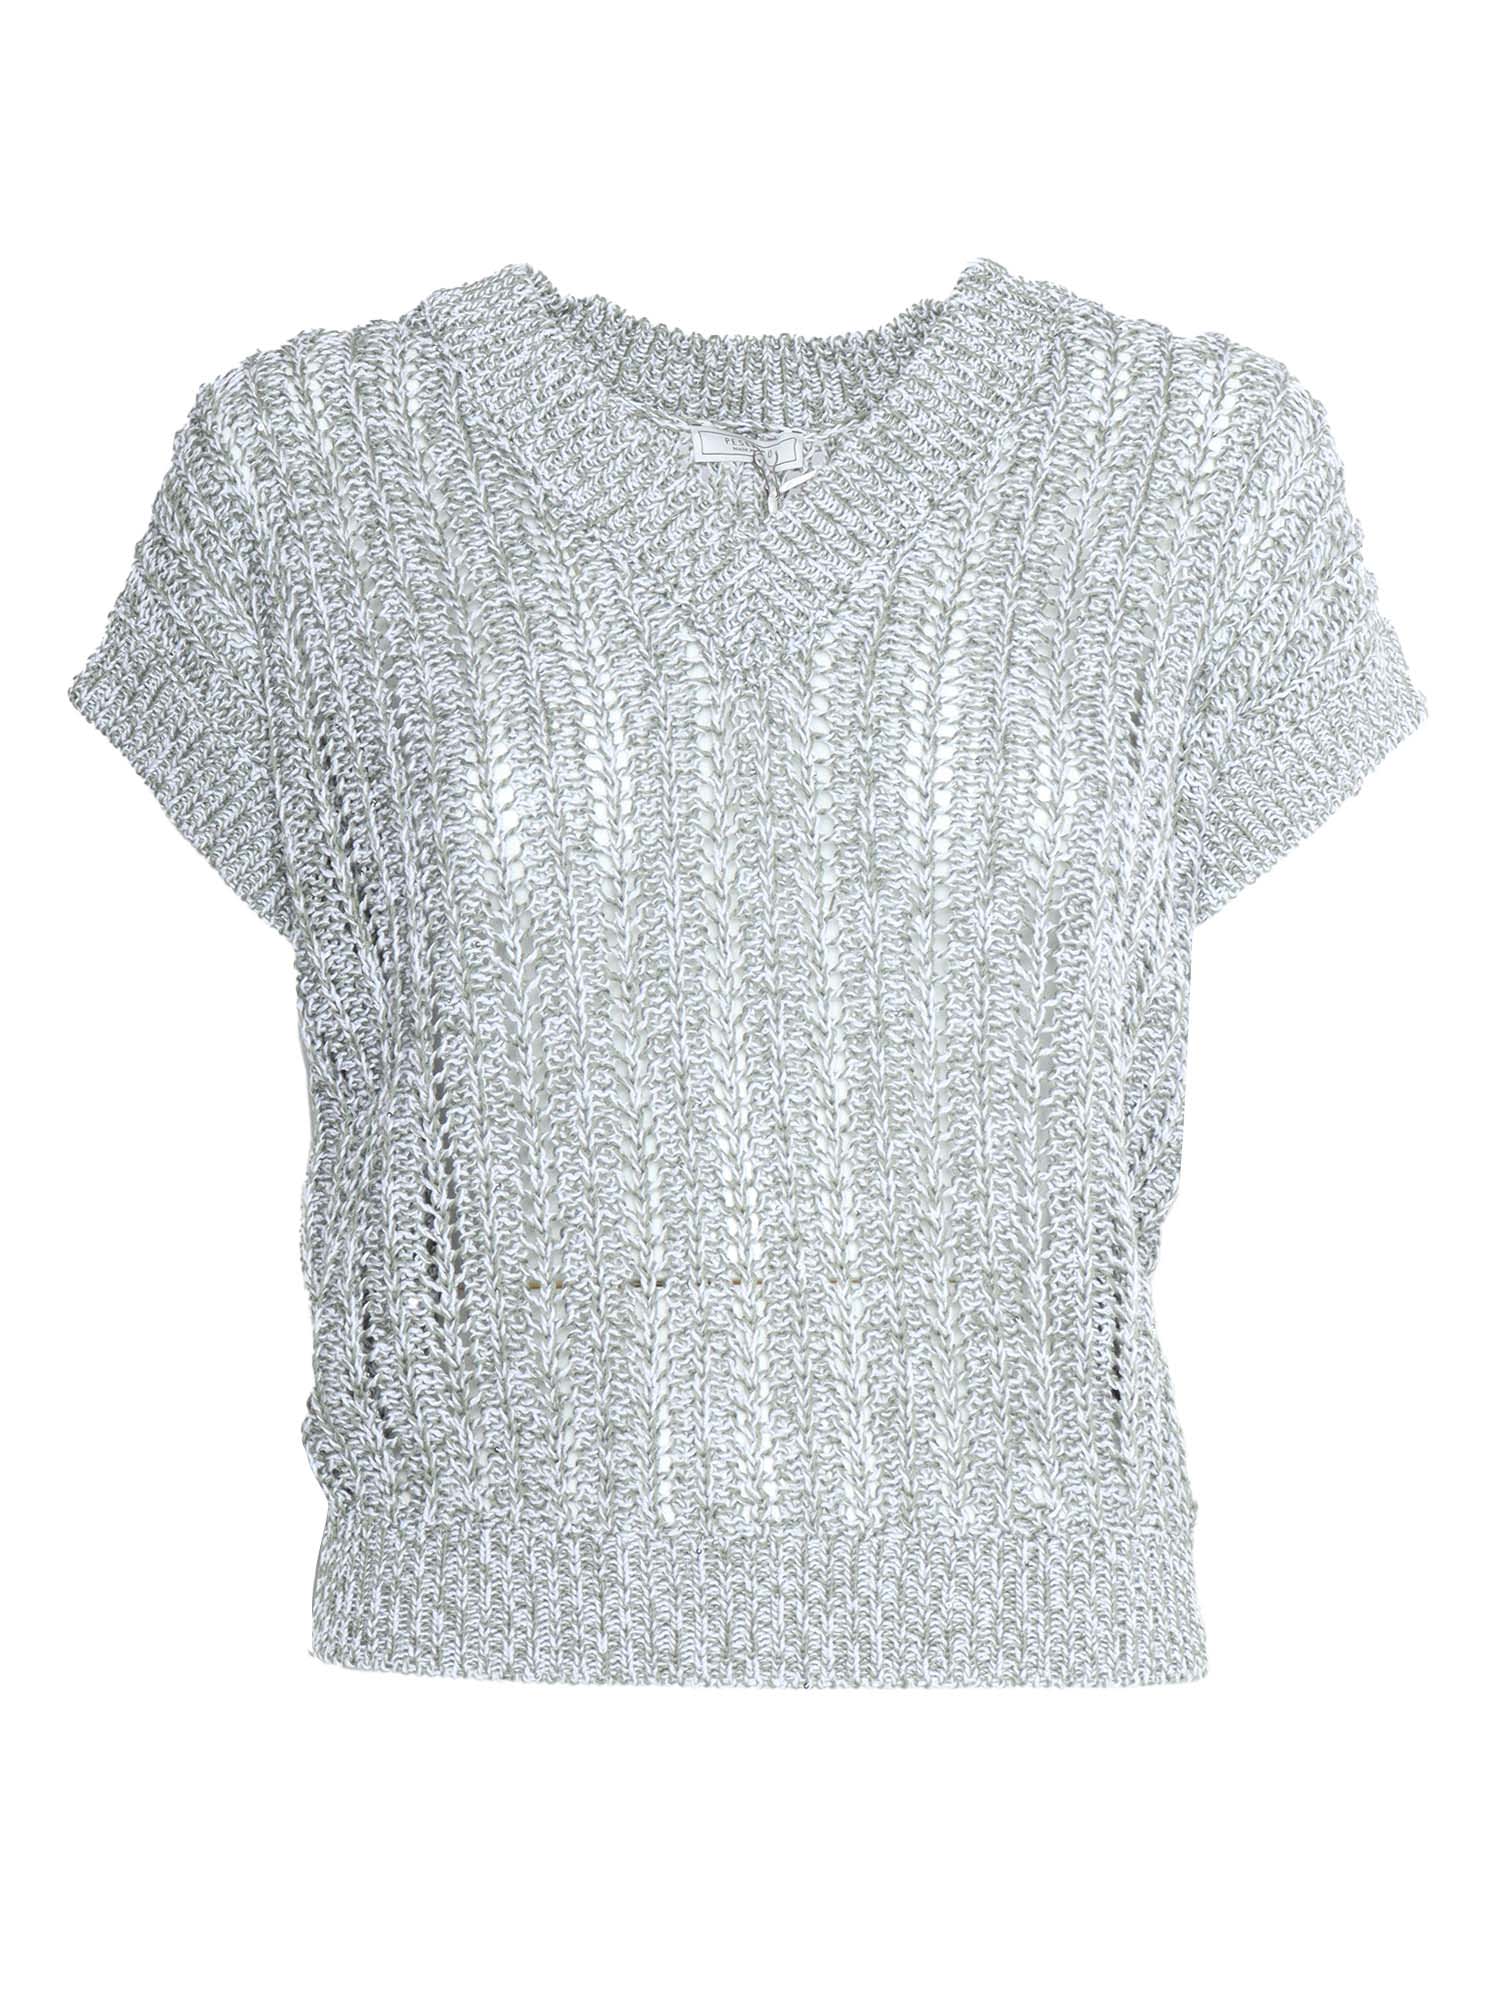 PESERICO SILVER TRICOT SWEATER